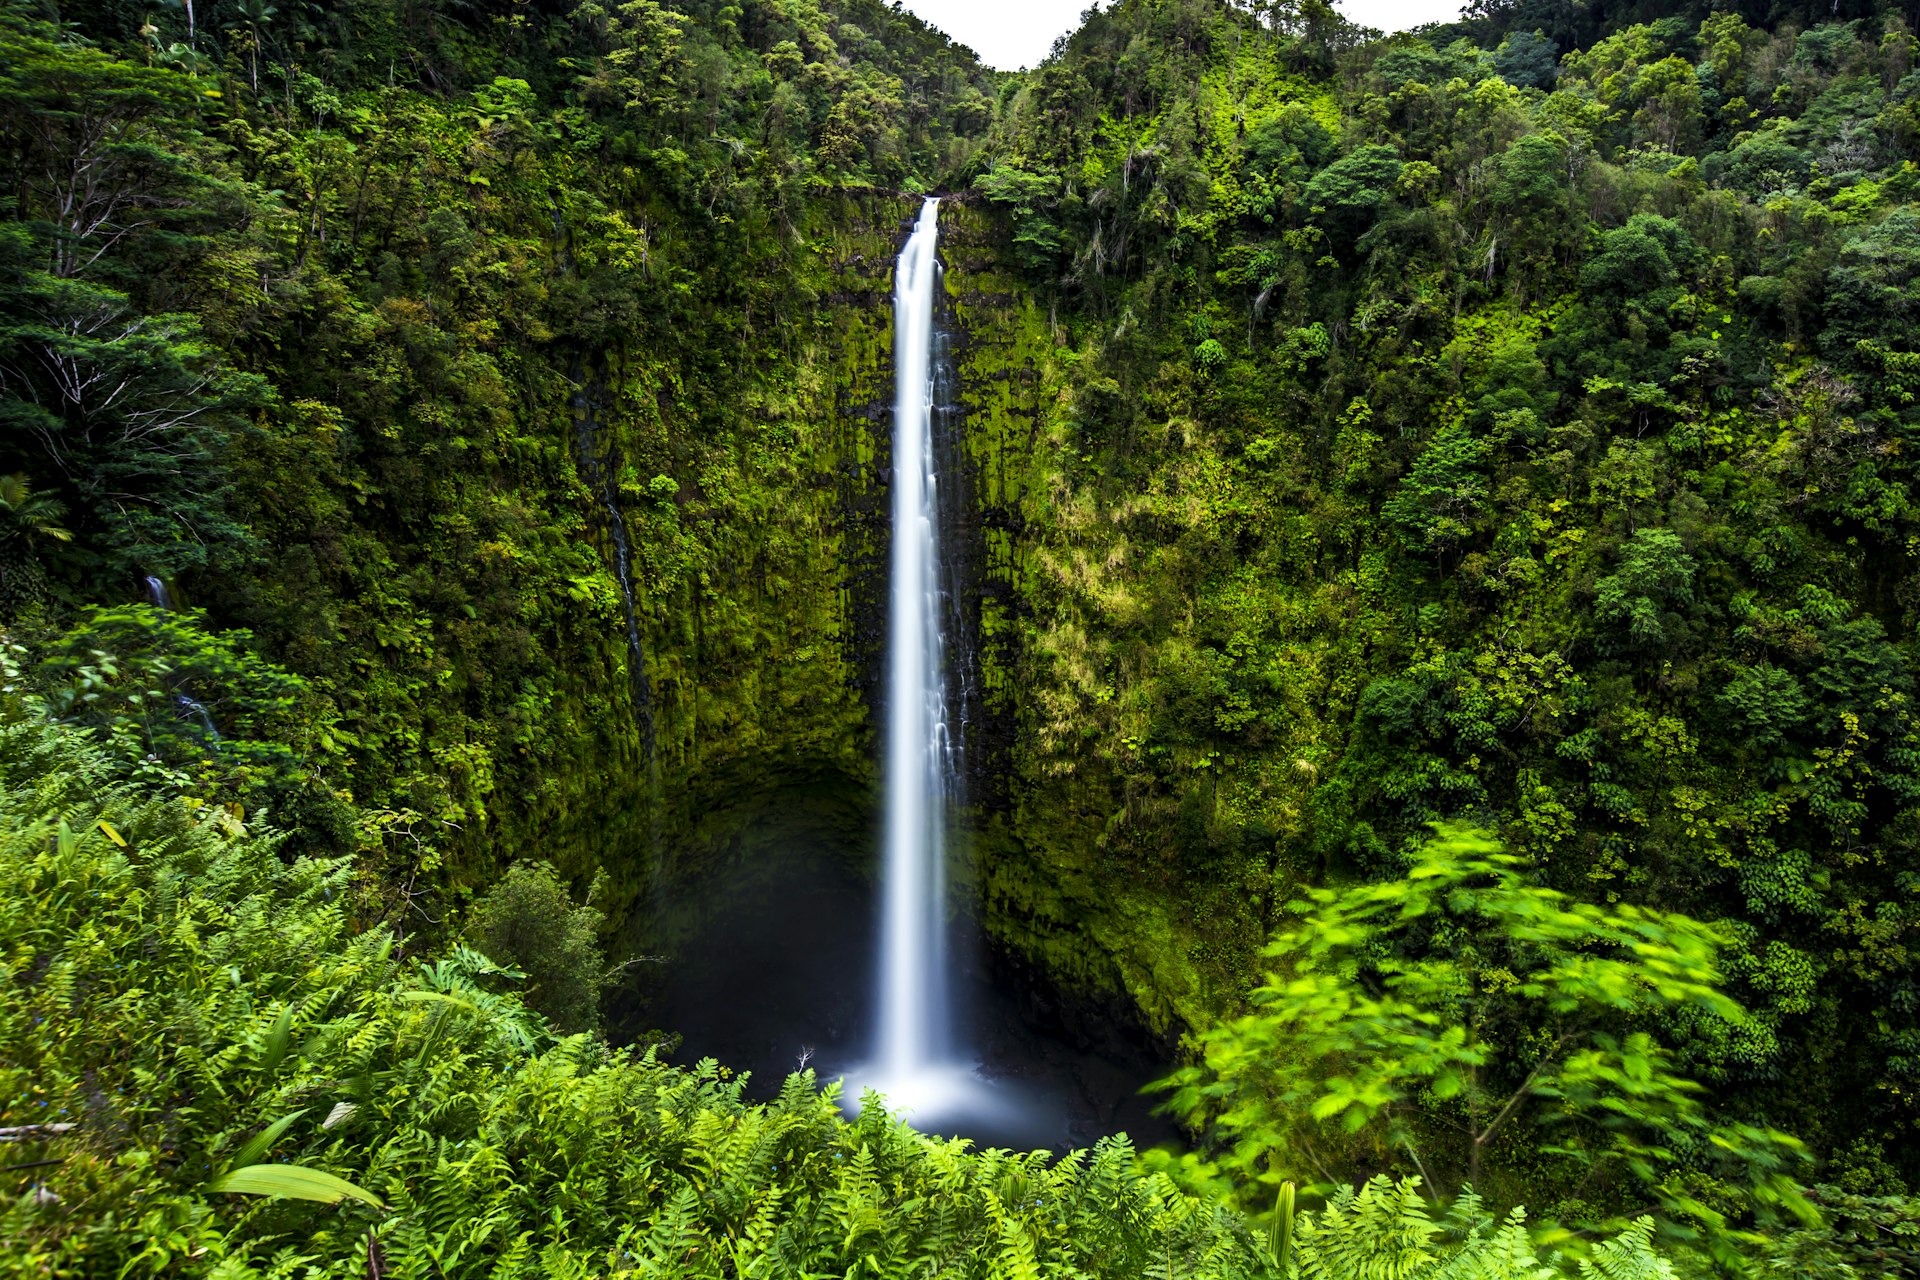 The 422 feet tall 'Akaka Falls thunder down from green hills near Hilo on Big Island, Hawaii and into the large pool below.